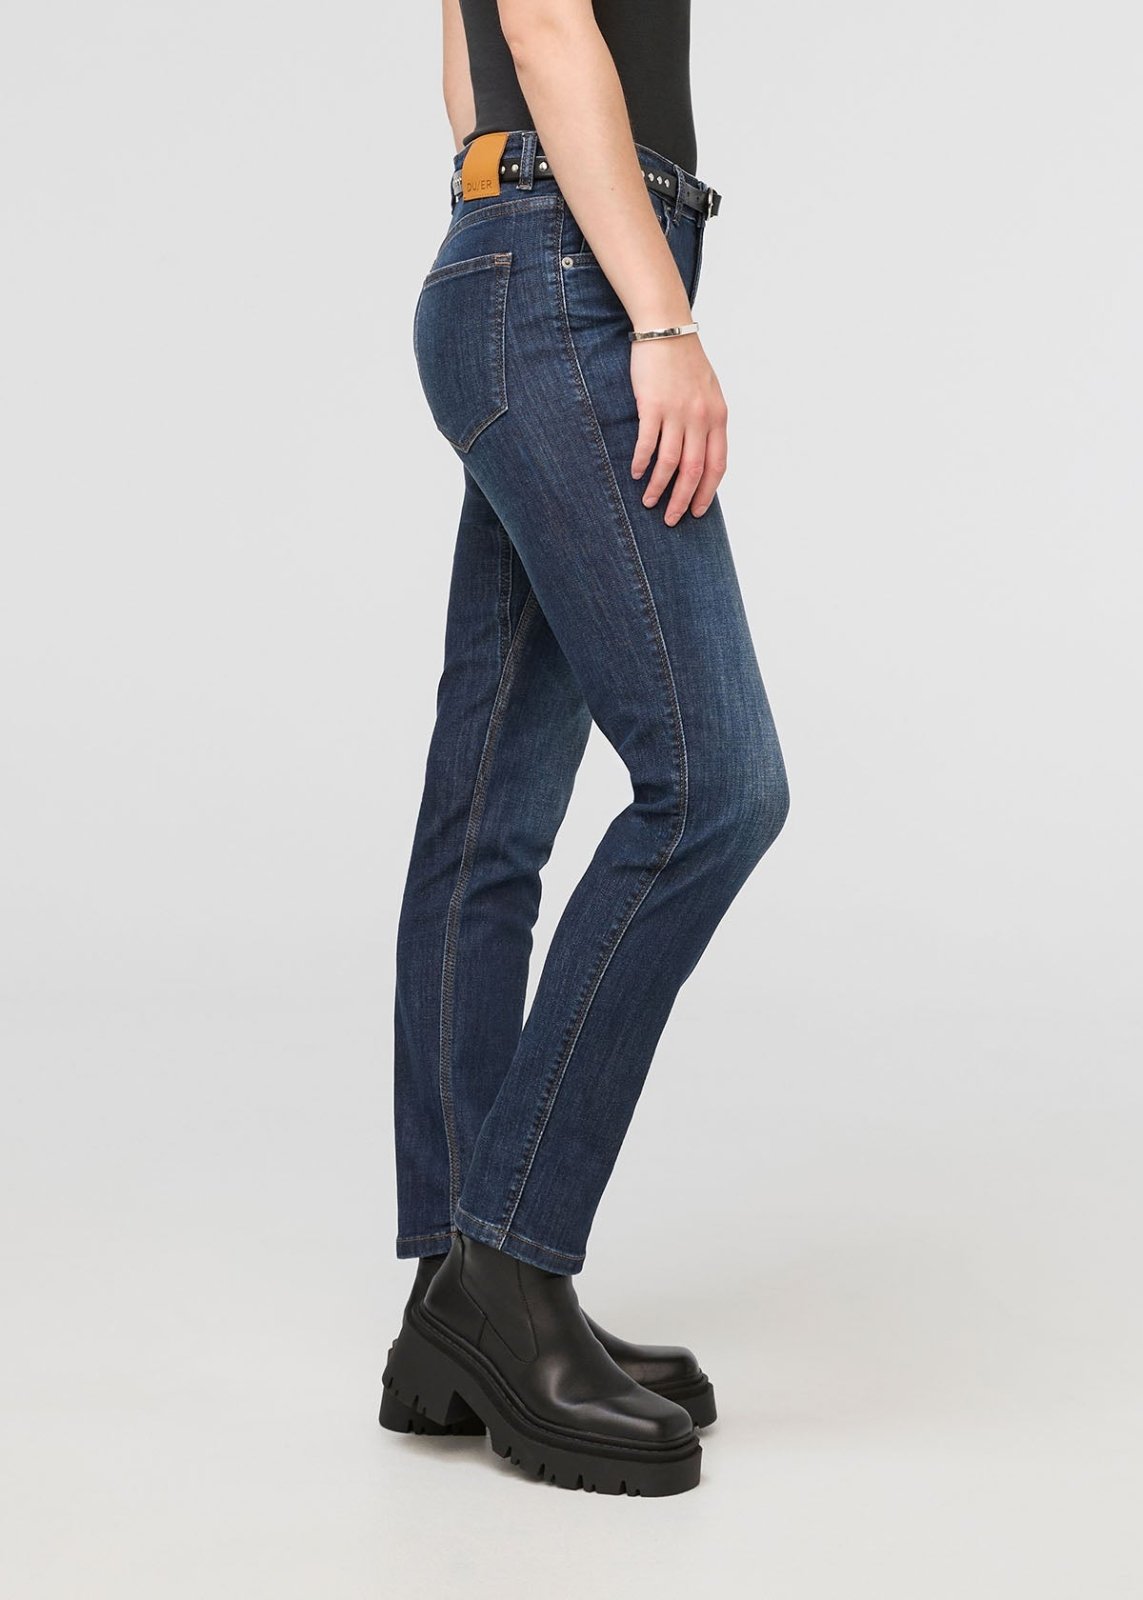 Women's Mid Rise Relaxed Fit Fleece Stretch Jeans